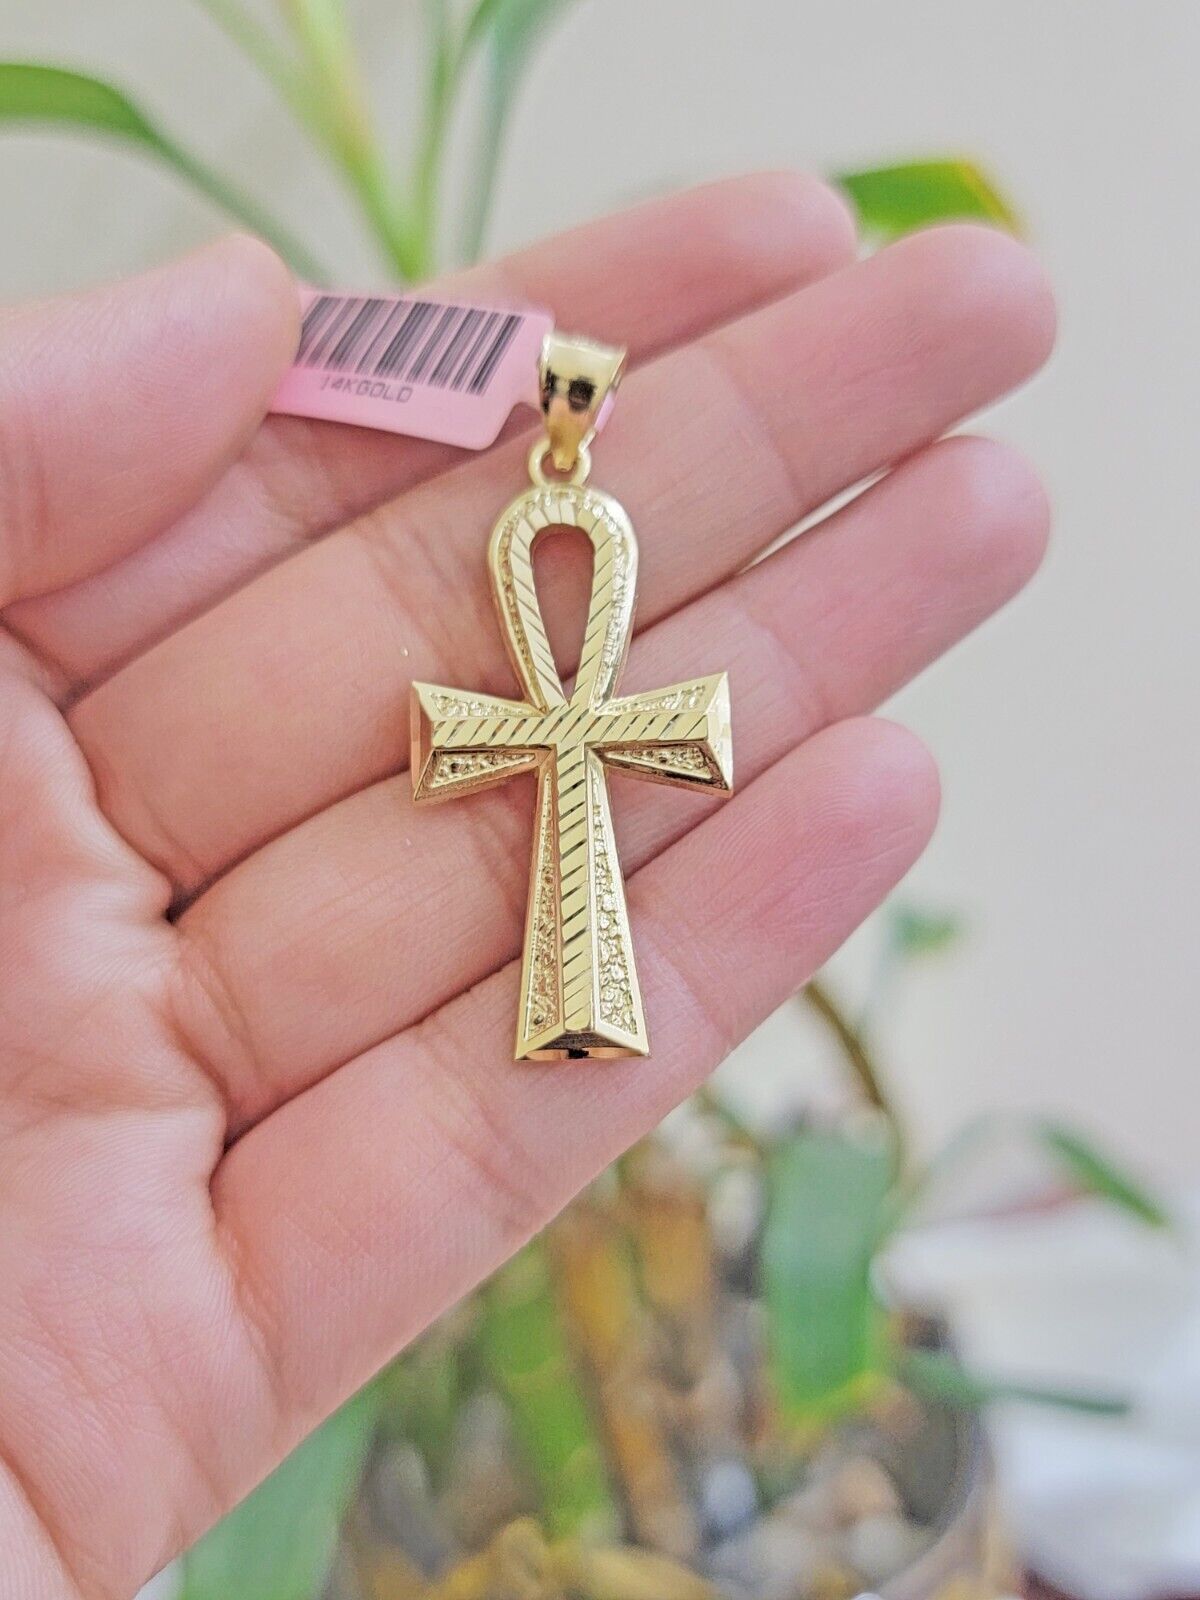 Amazon.com: DIONJEWEL 14k Gold Ankh Necklace, Ancient Ankh Charm Pendant,  Life & Soul Symbol Pharaoh Necklace, Minimalist Cross Necklace, Gift for  Her : Handmade Products